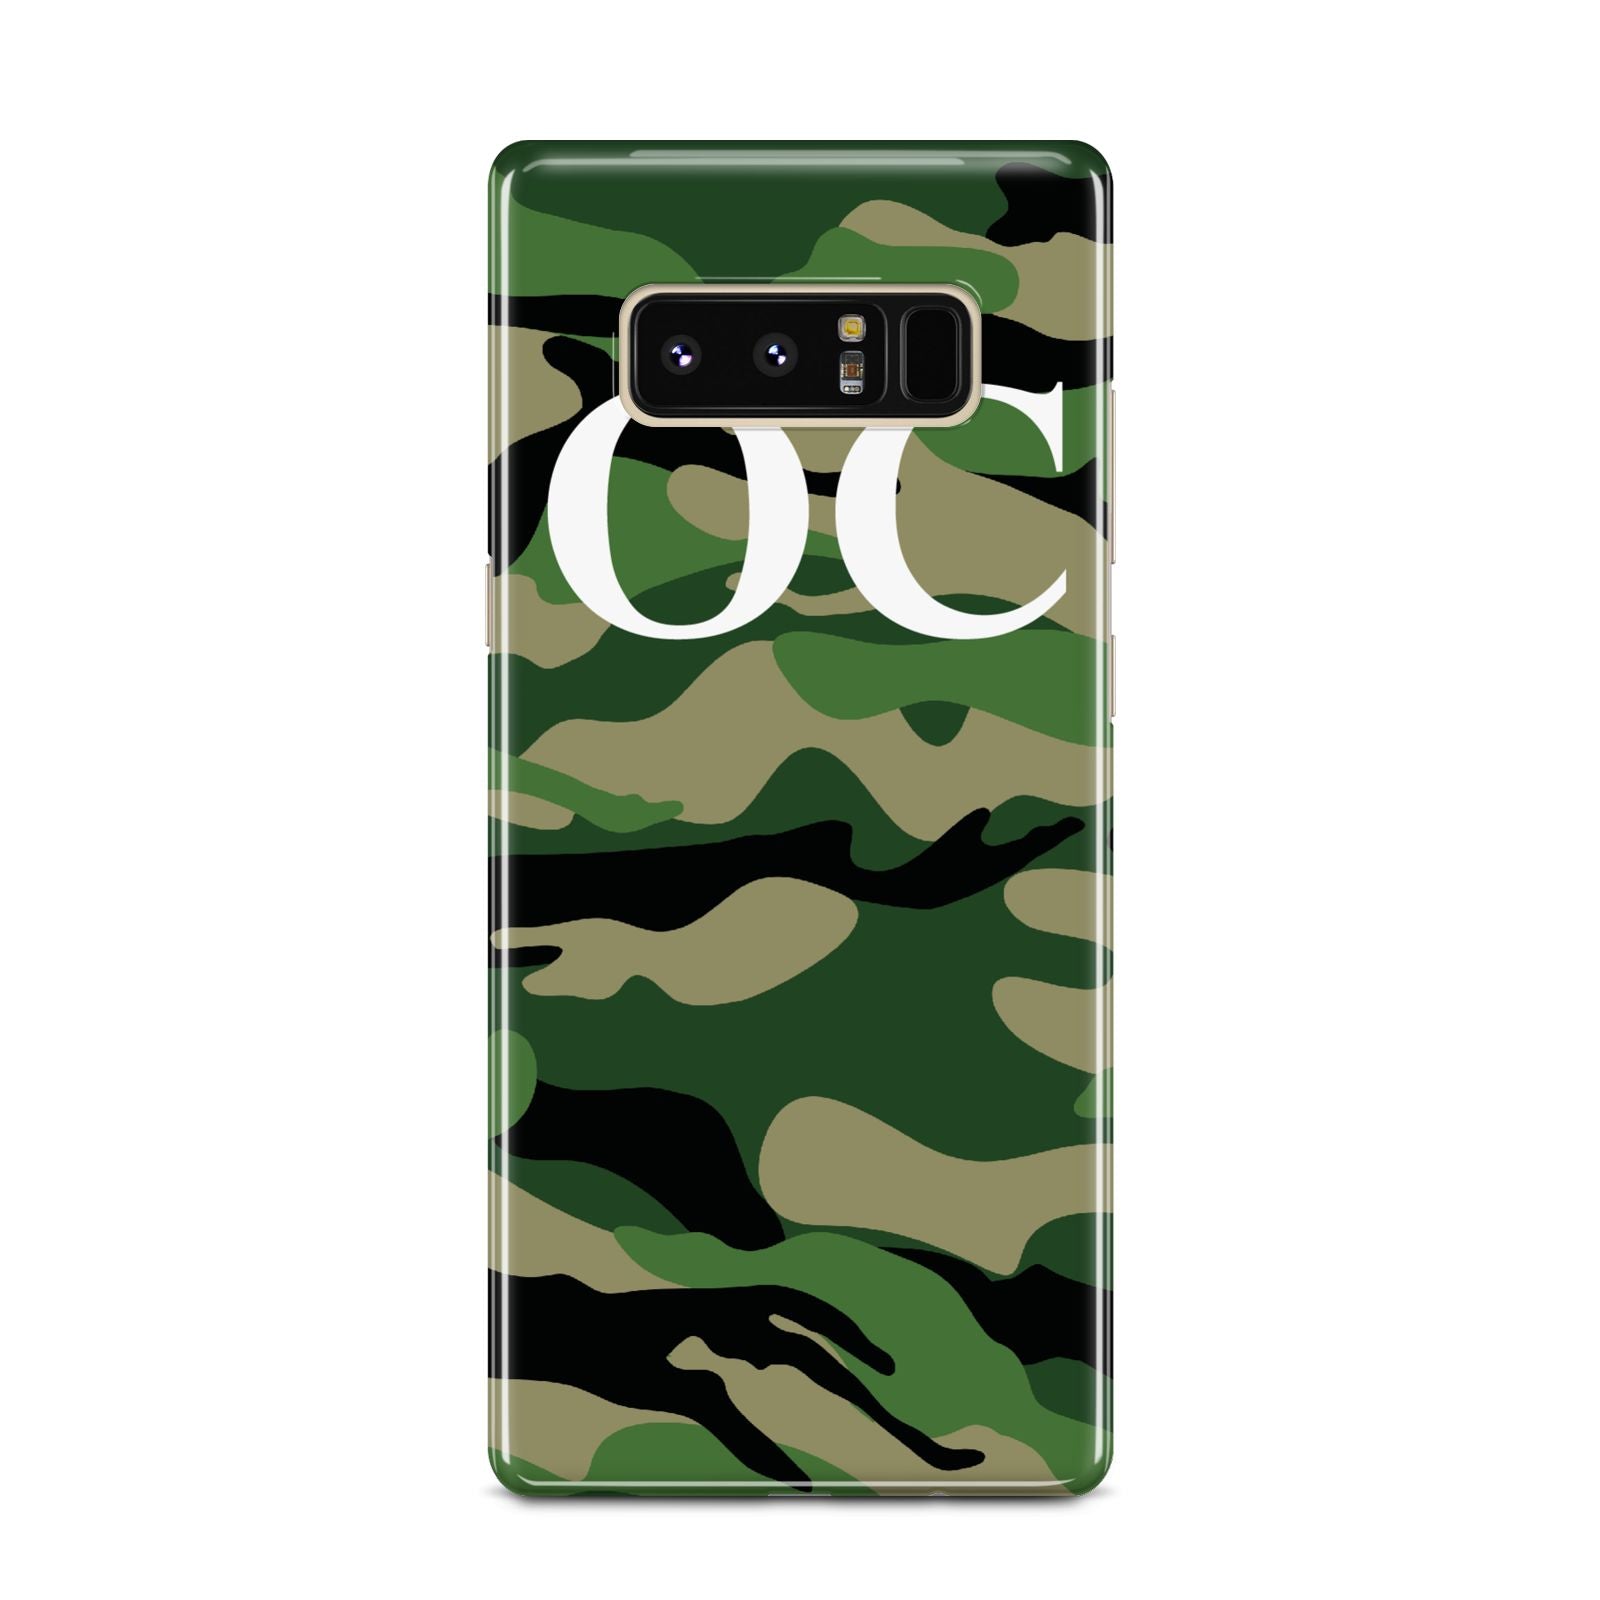 Personalised Camouflage Samsung Galaxy Note 8 Case